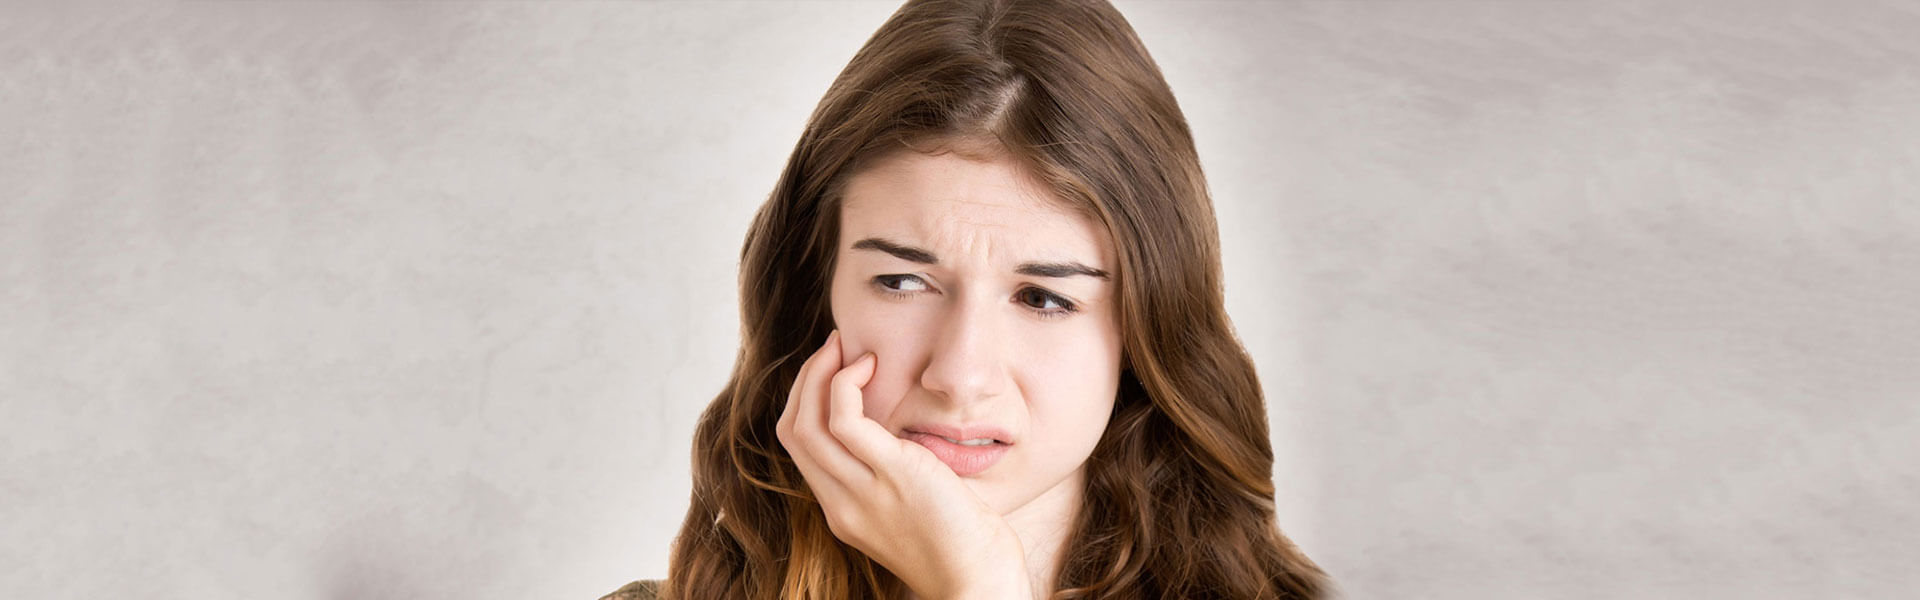 The Fearful Root Canal Therapy Gets Rid of That Excruciating Toothache Bothering You